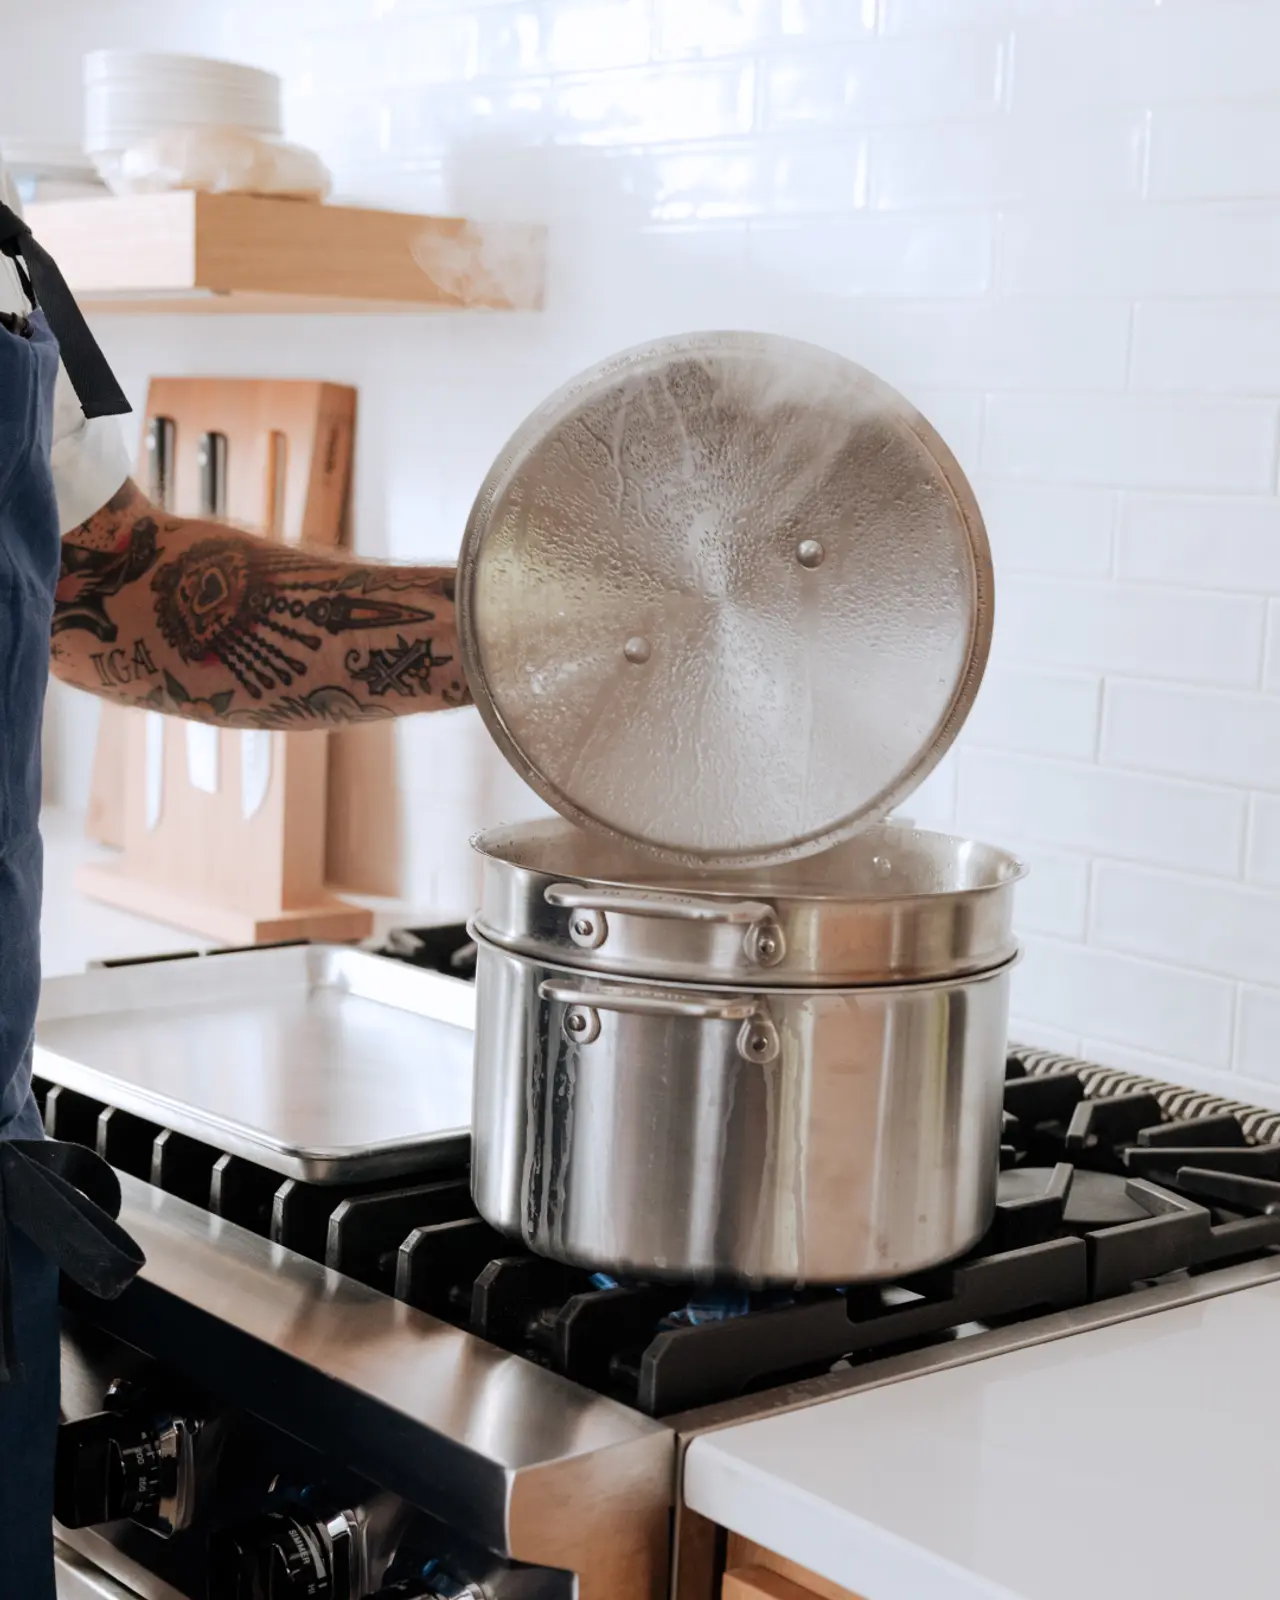 A person with a tattooed arm lifts the lid off a steaming pot on a stove.